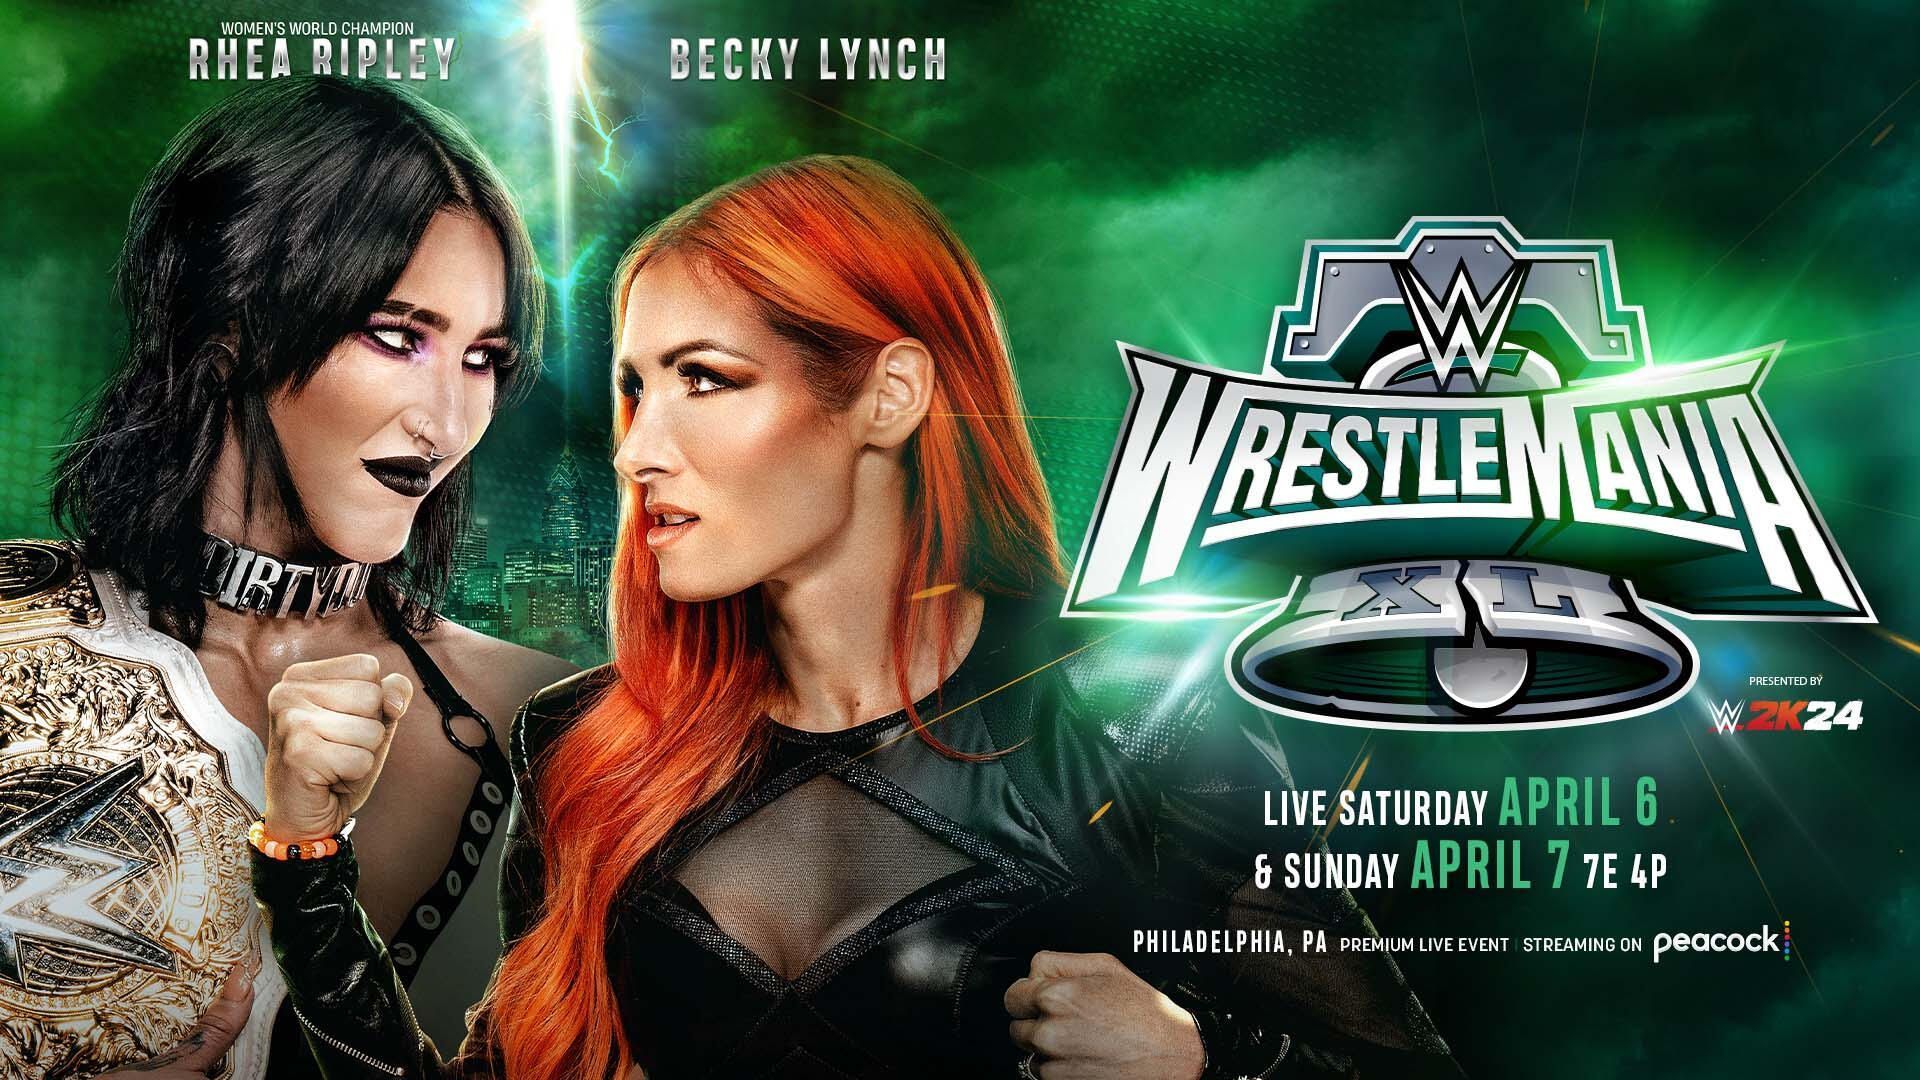 The dream match is official for WrestleMania 40